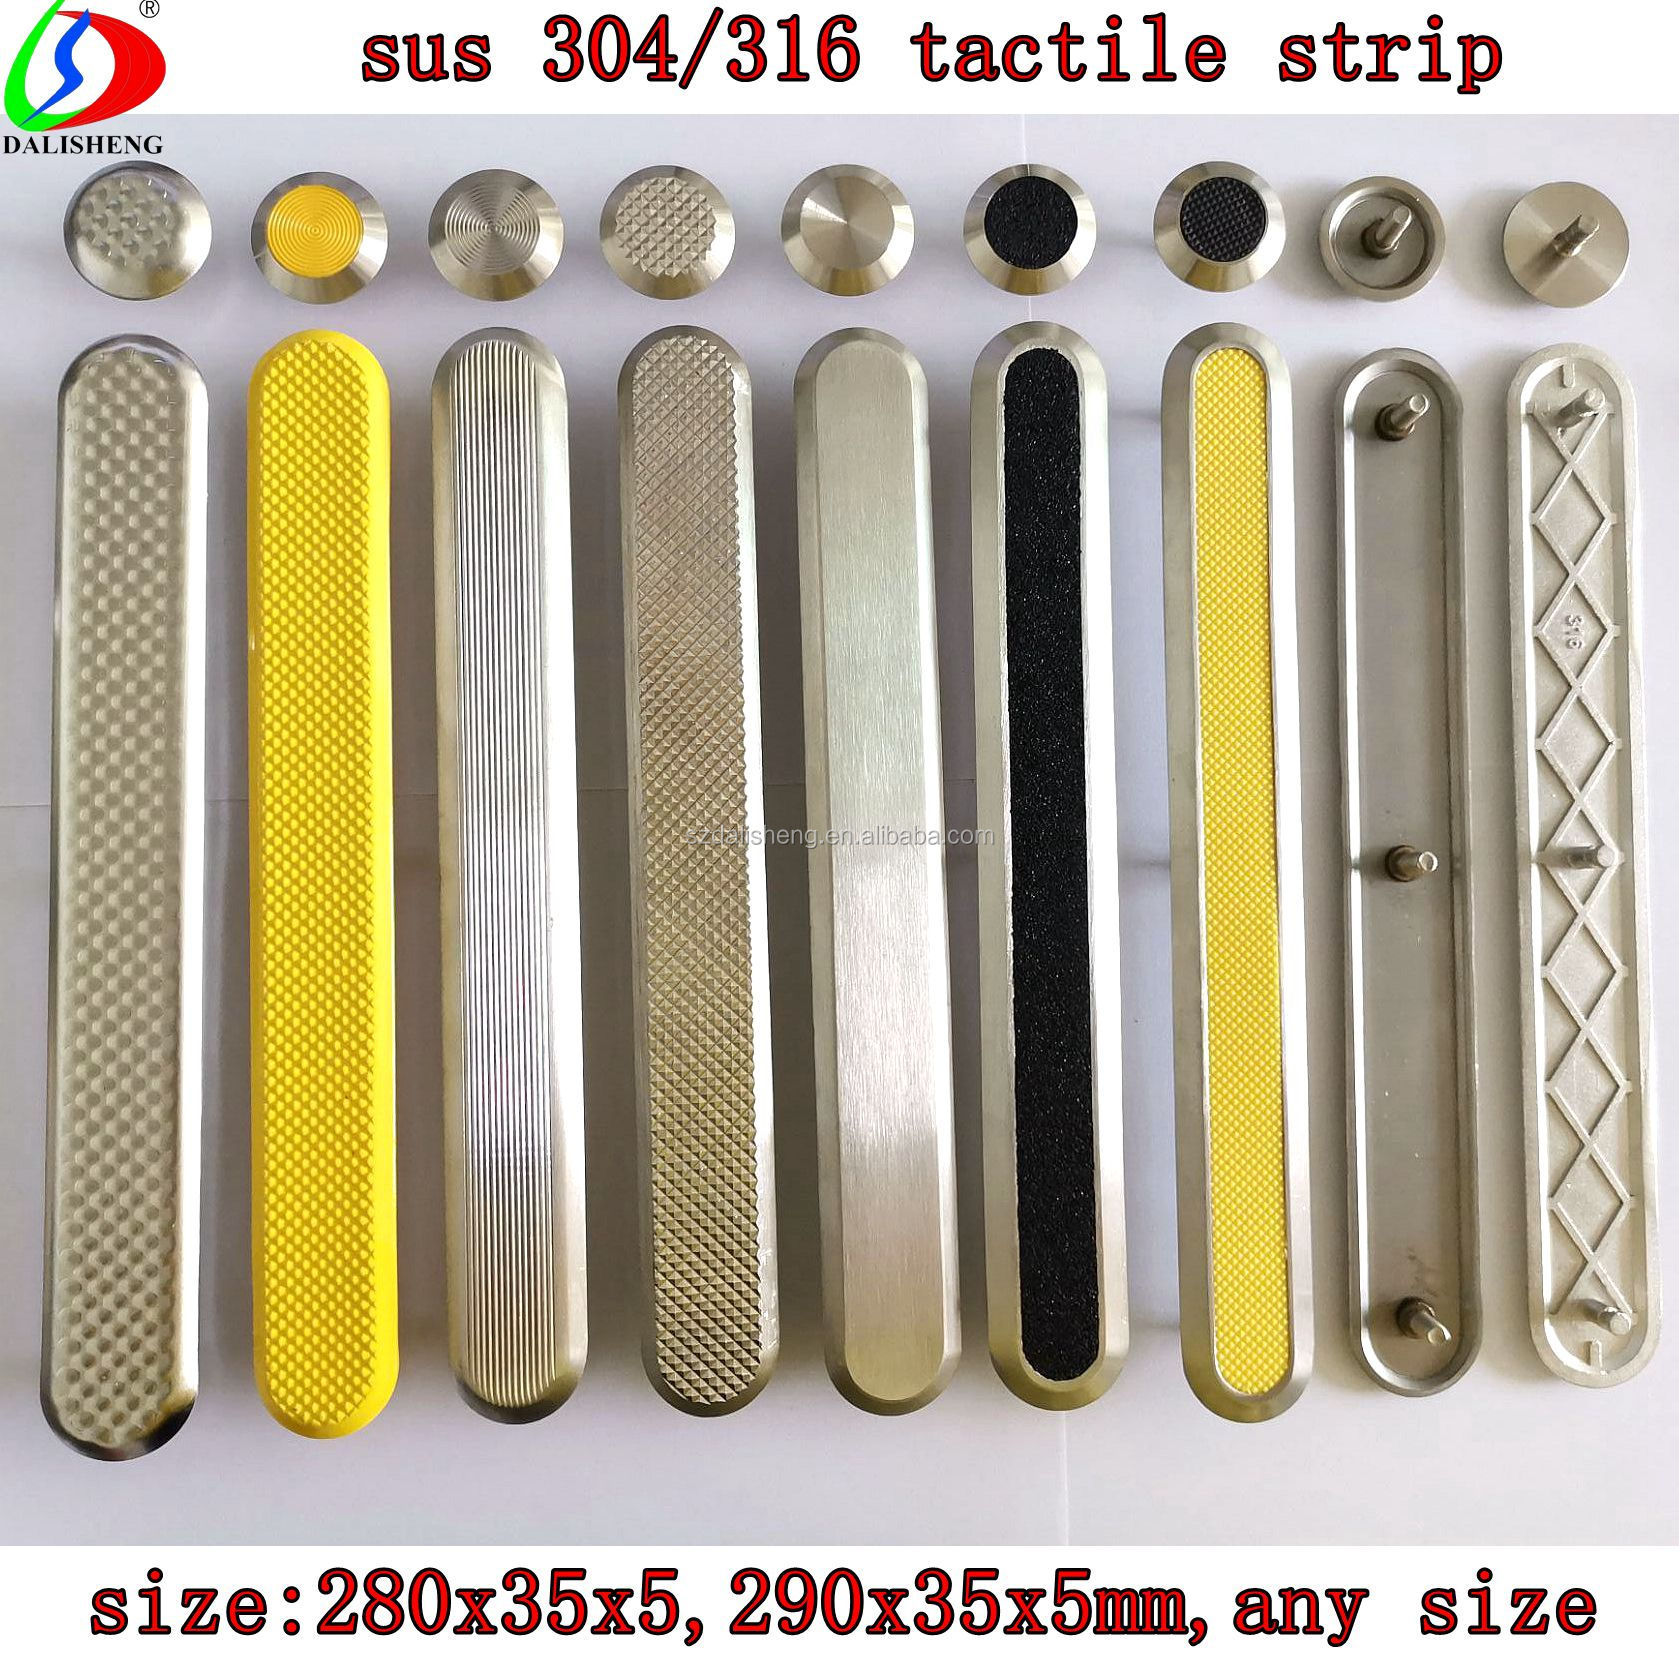 What are tactile indicator studs strips bar